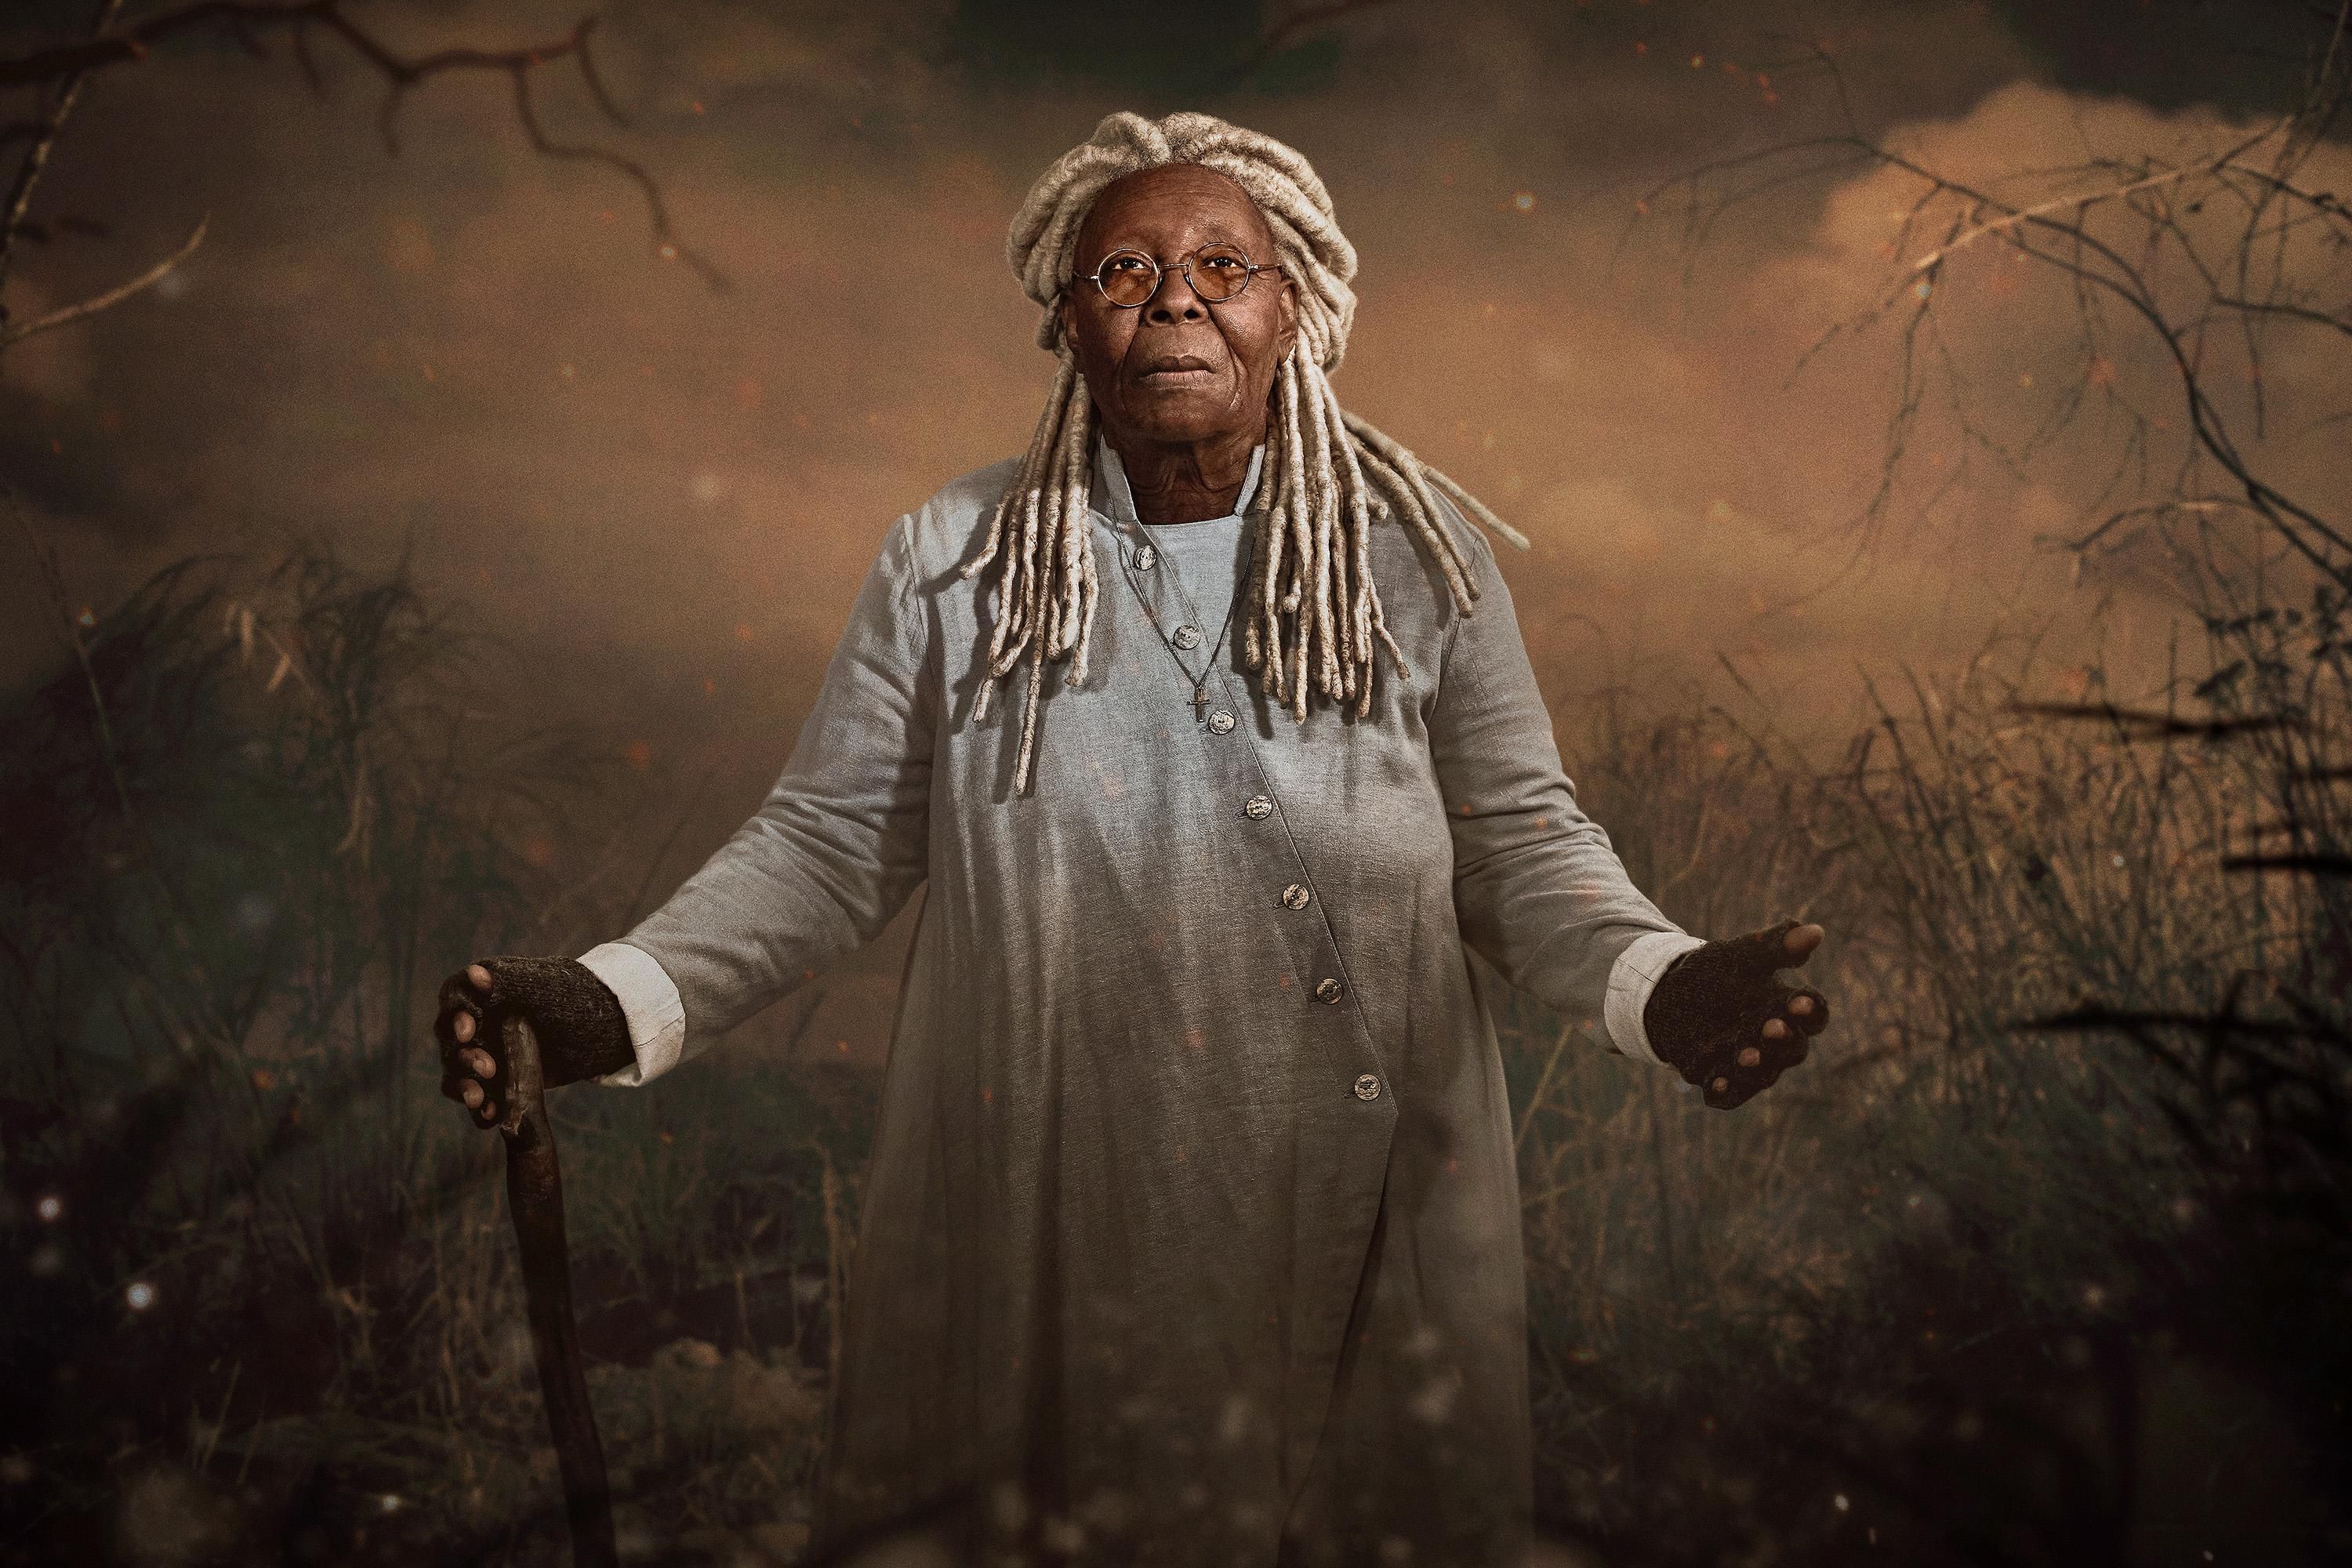 Whoopi Goldberg as 108 year-old Mother Abagail standing a blasted wasteland.